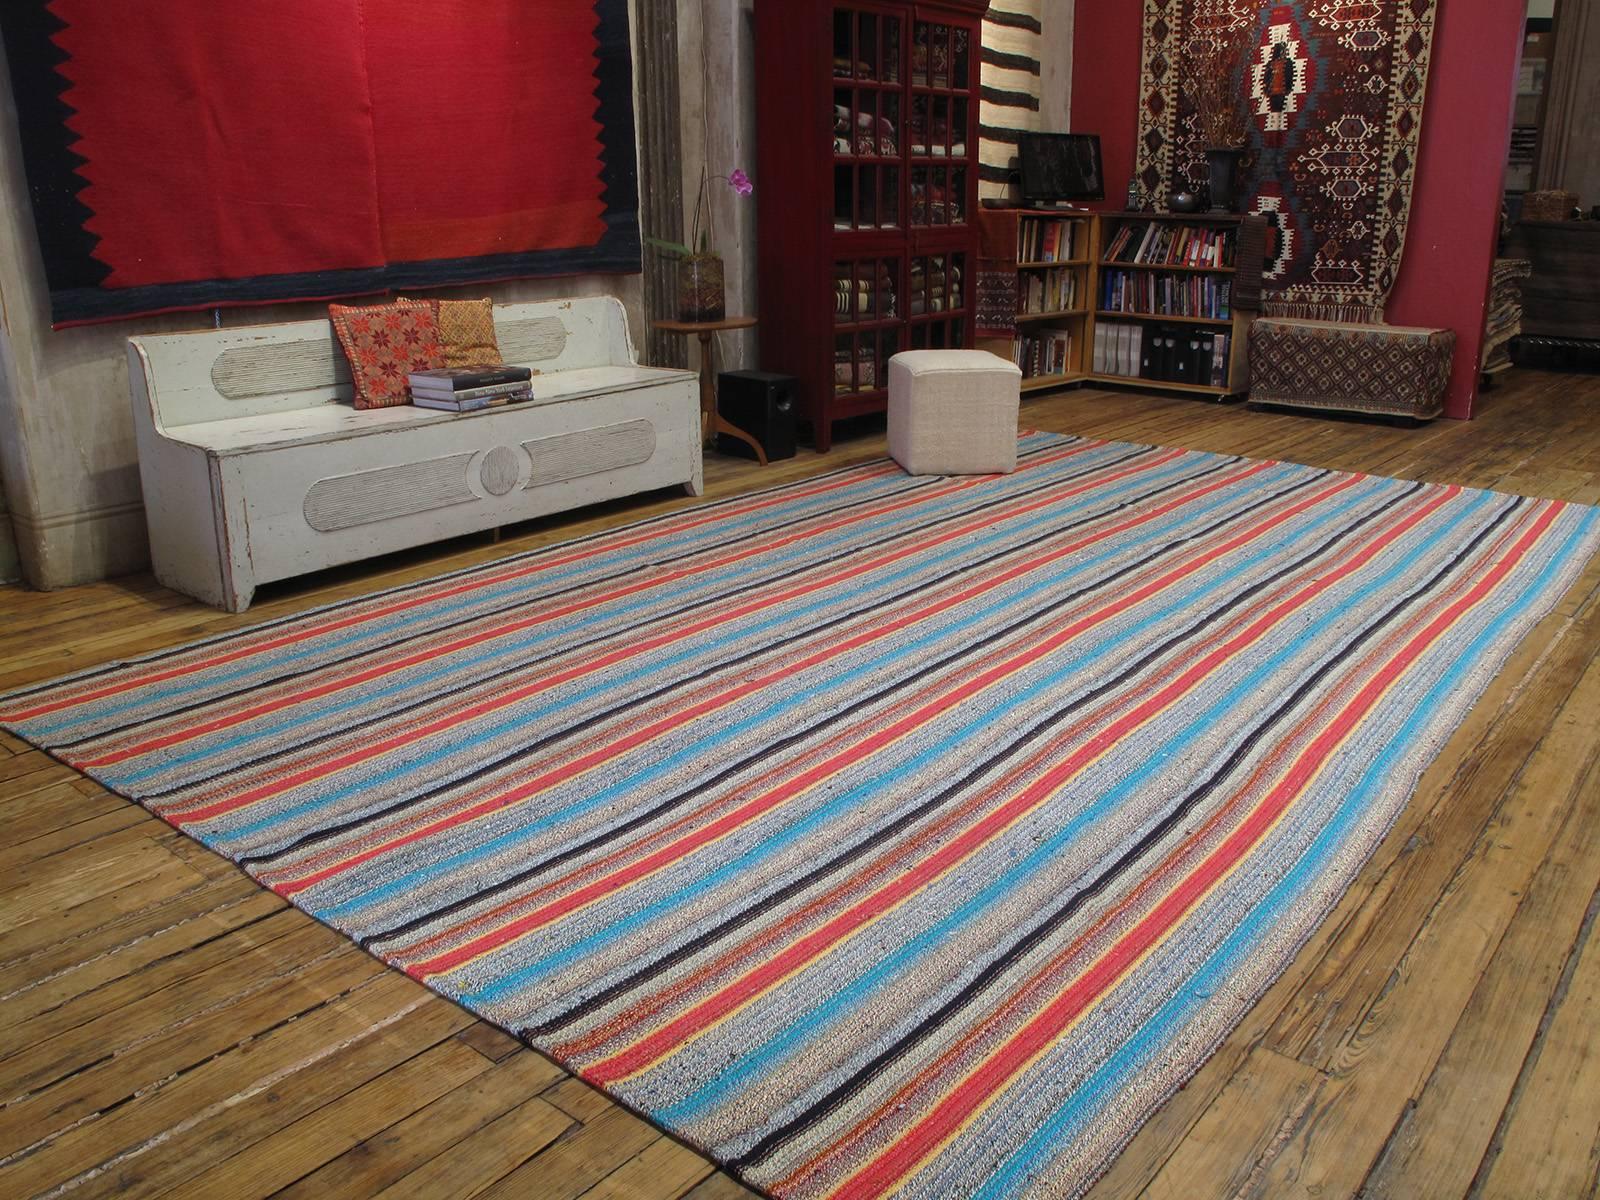 Large Kilim rug with colorful stripes. An unusually large and colorful flat-weave from Central Turkey, rug is woven with an ingenious mixture of cotton rag and wool.

(Rug size can be adjusted. Please inquire.)